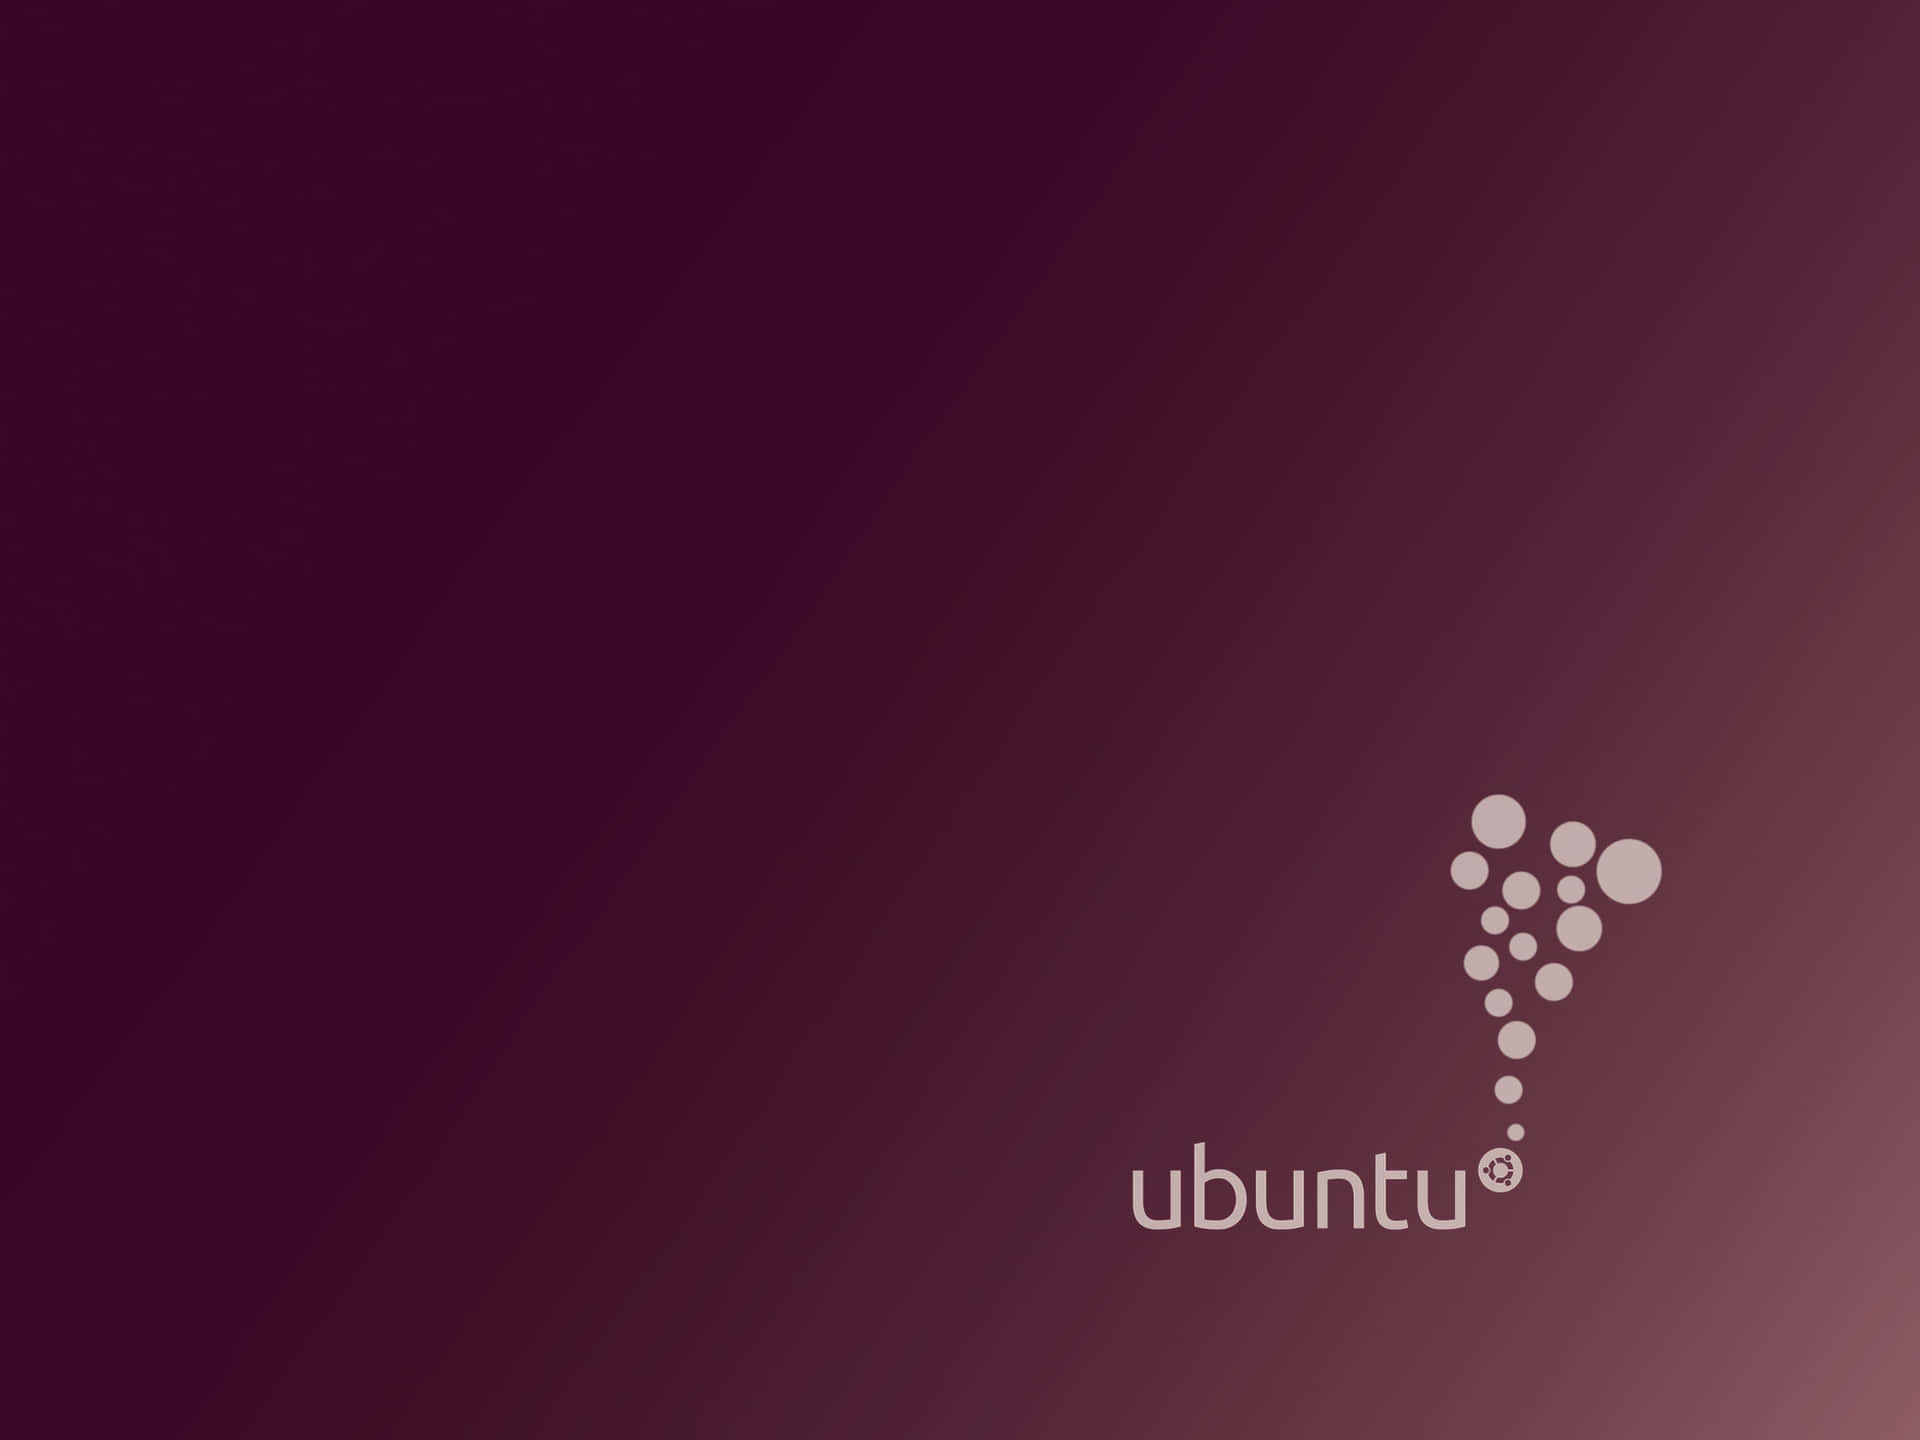 Discover the power of open source computing with Ubuntu